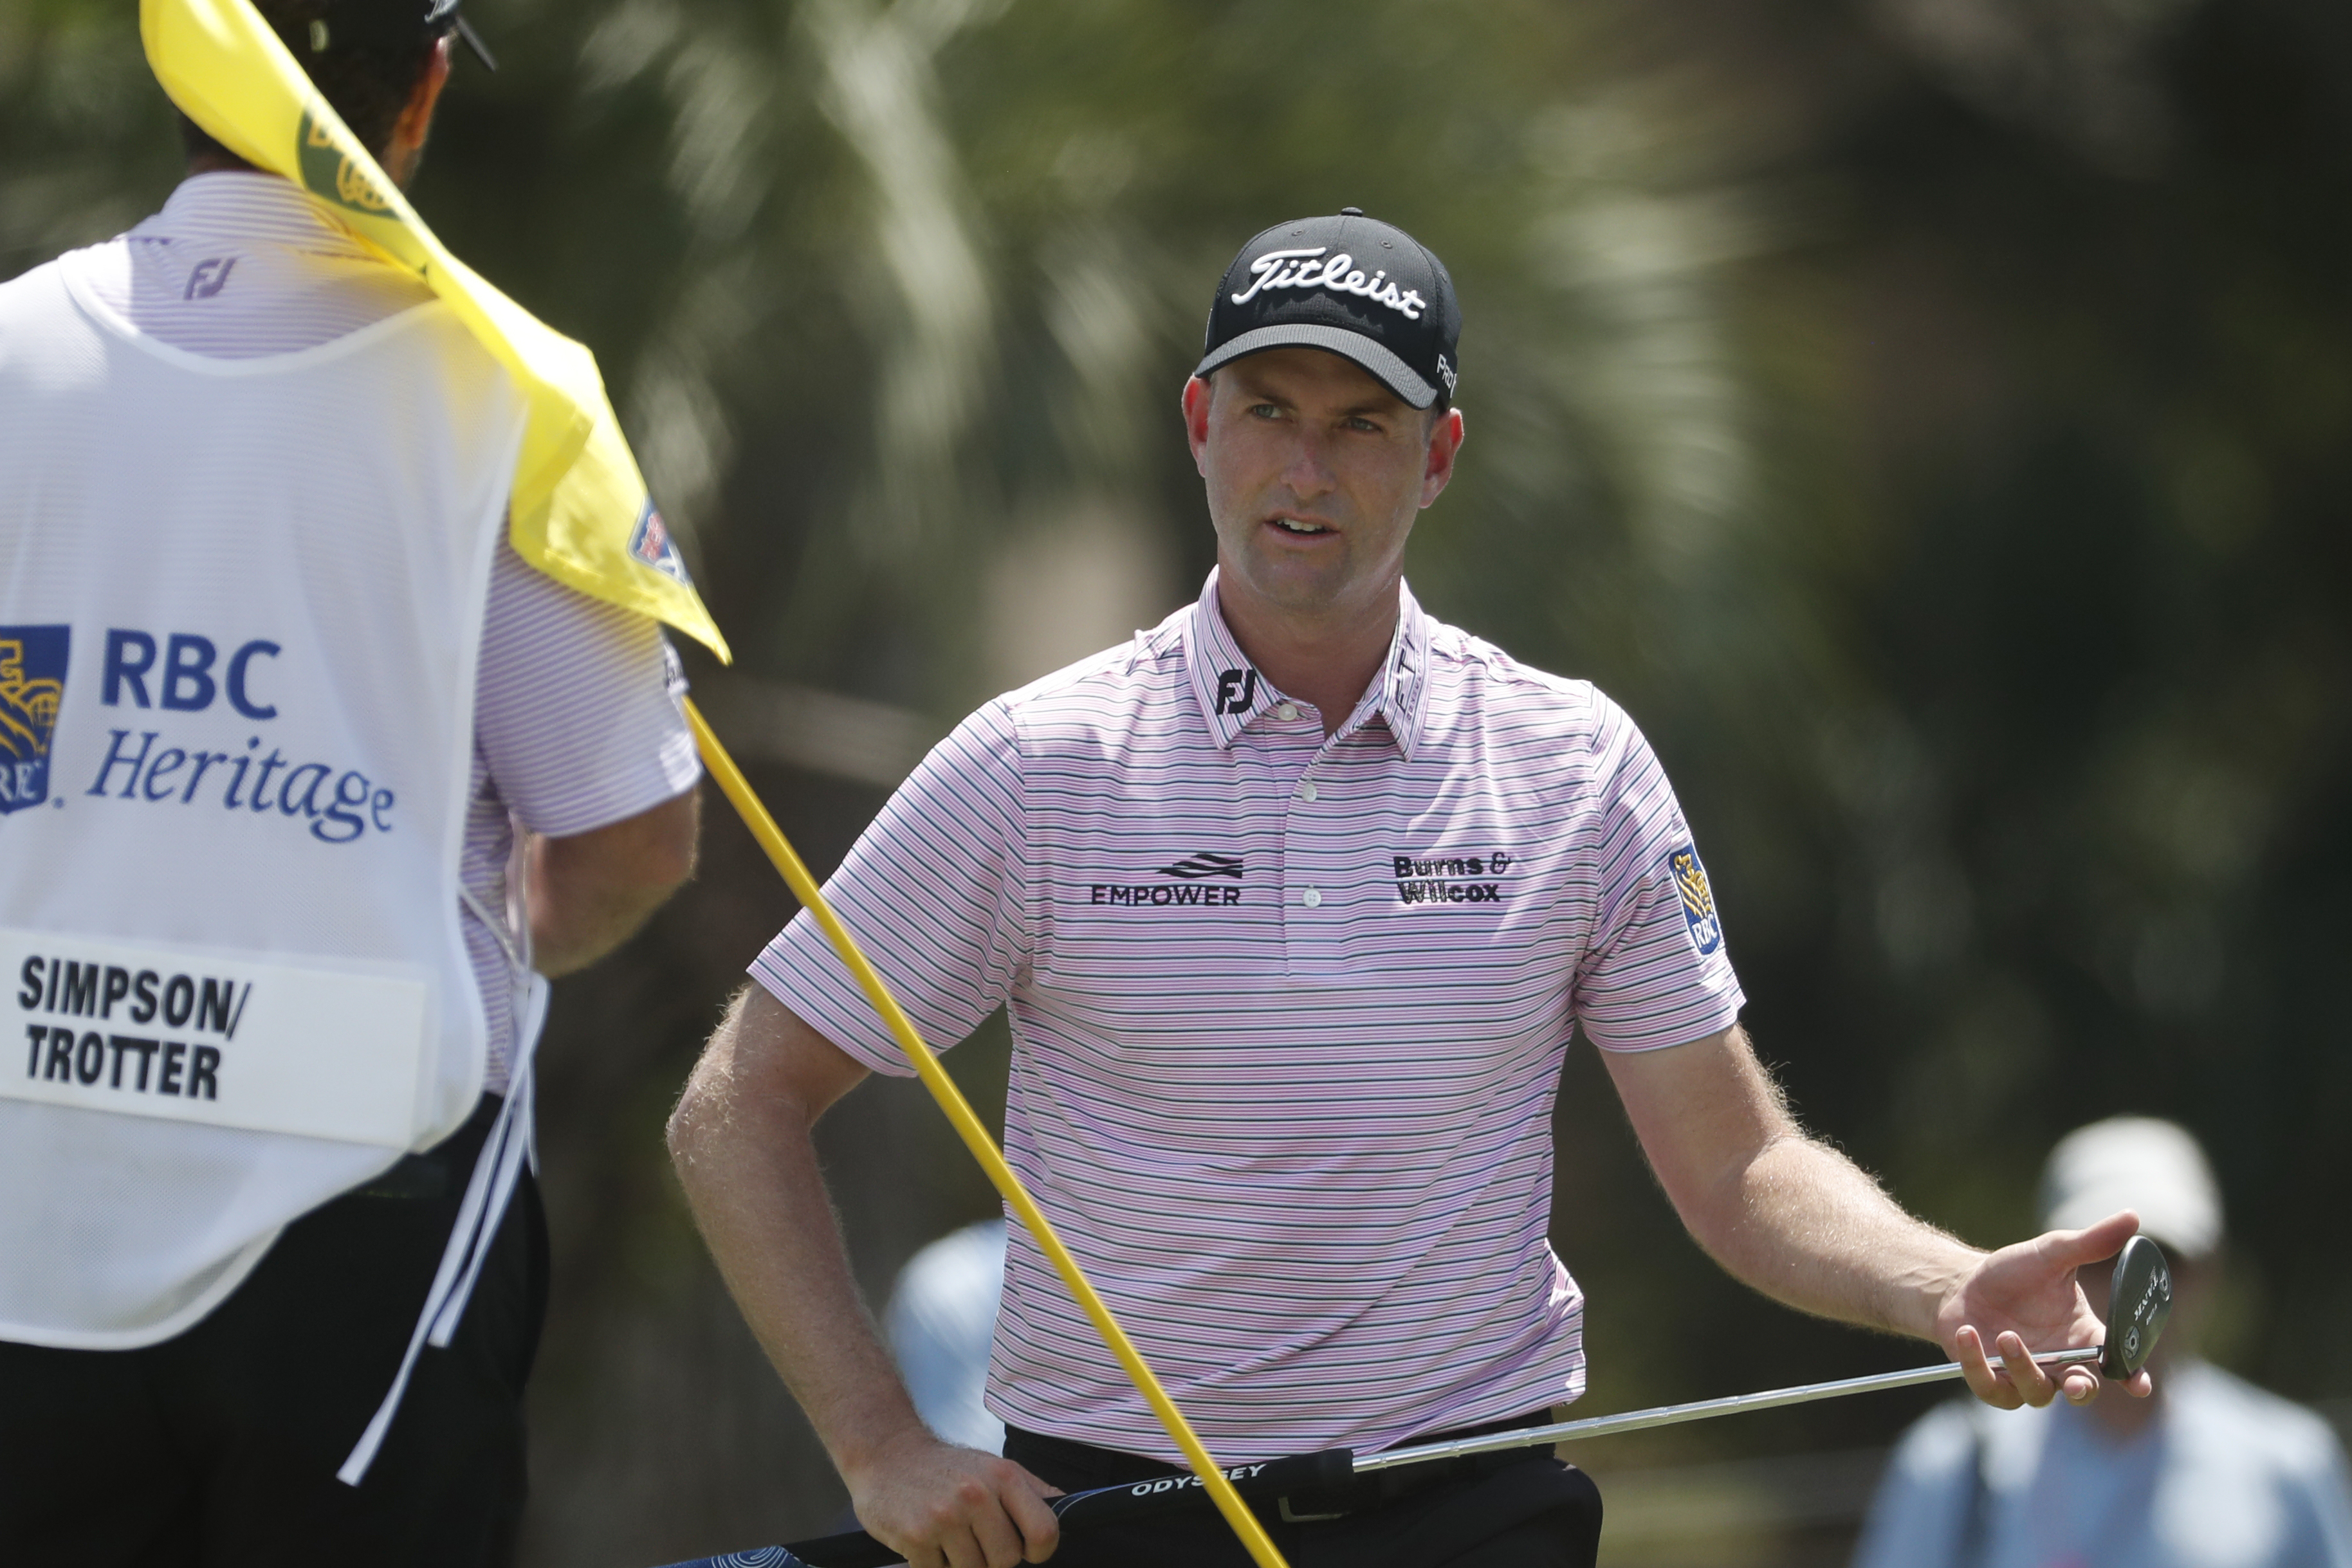 RBC Heritage Final Round Live stream, start time, CBS TV schedule, how to watch PGA 2020